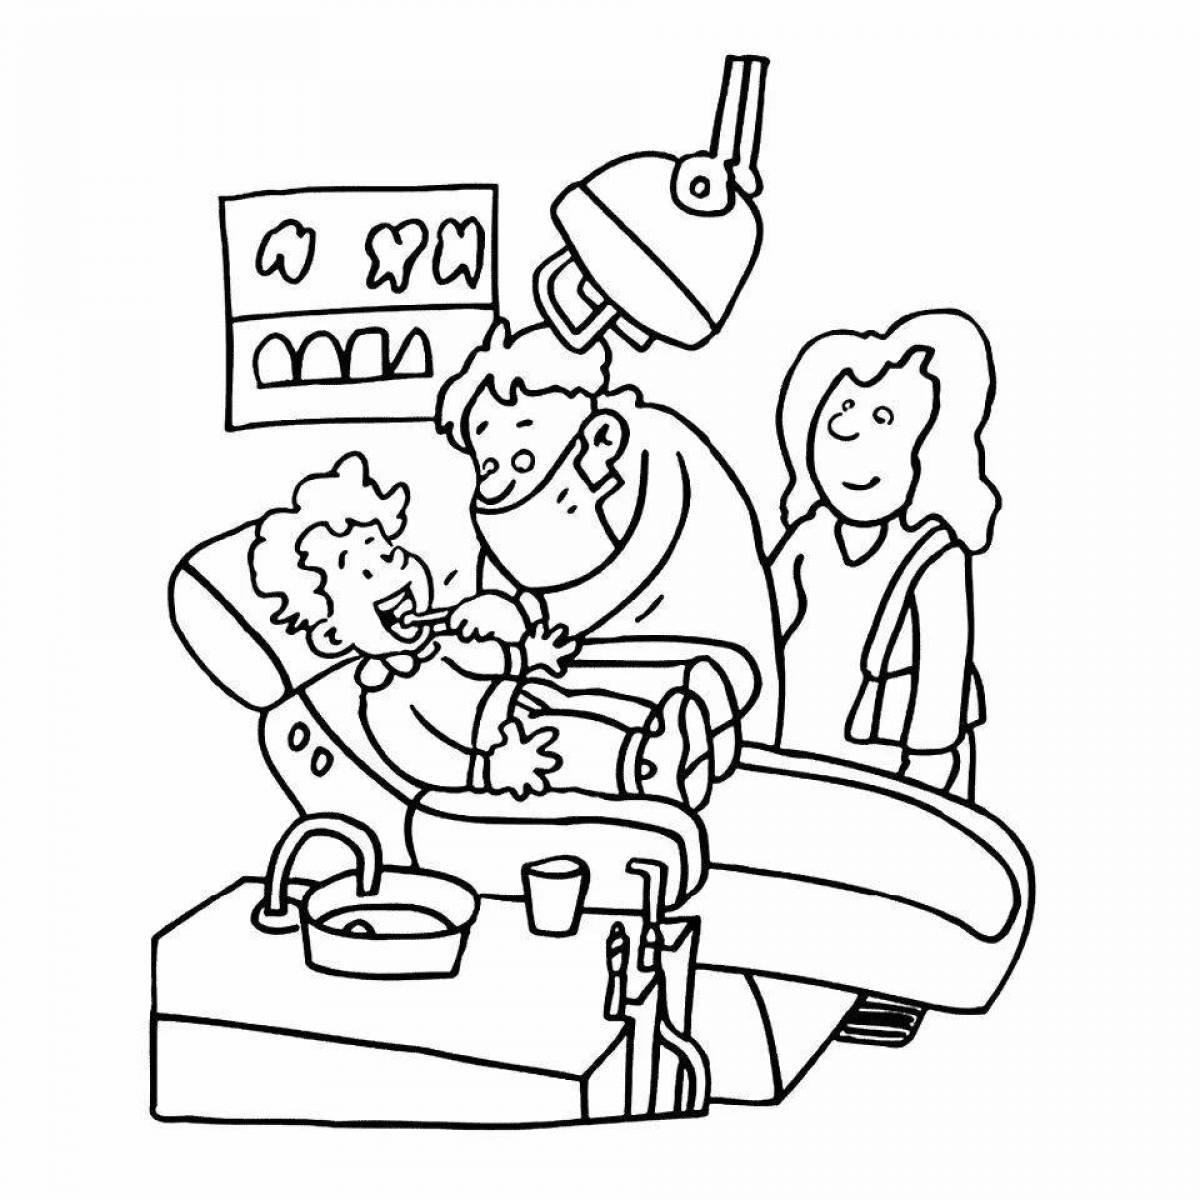 Incredible hospital coloring book for kids